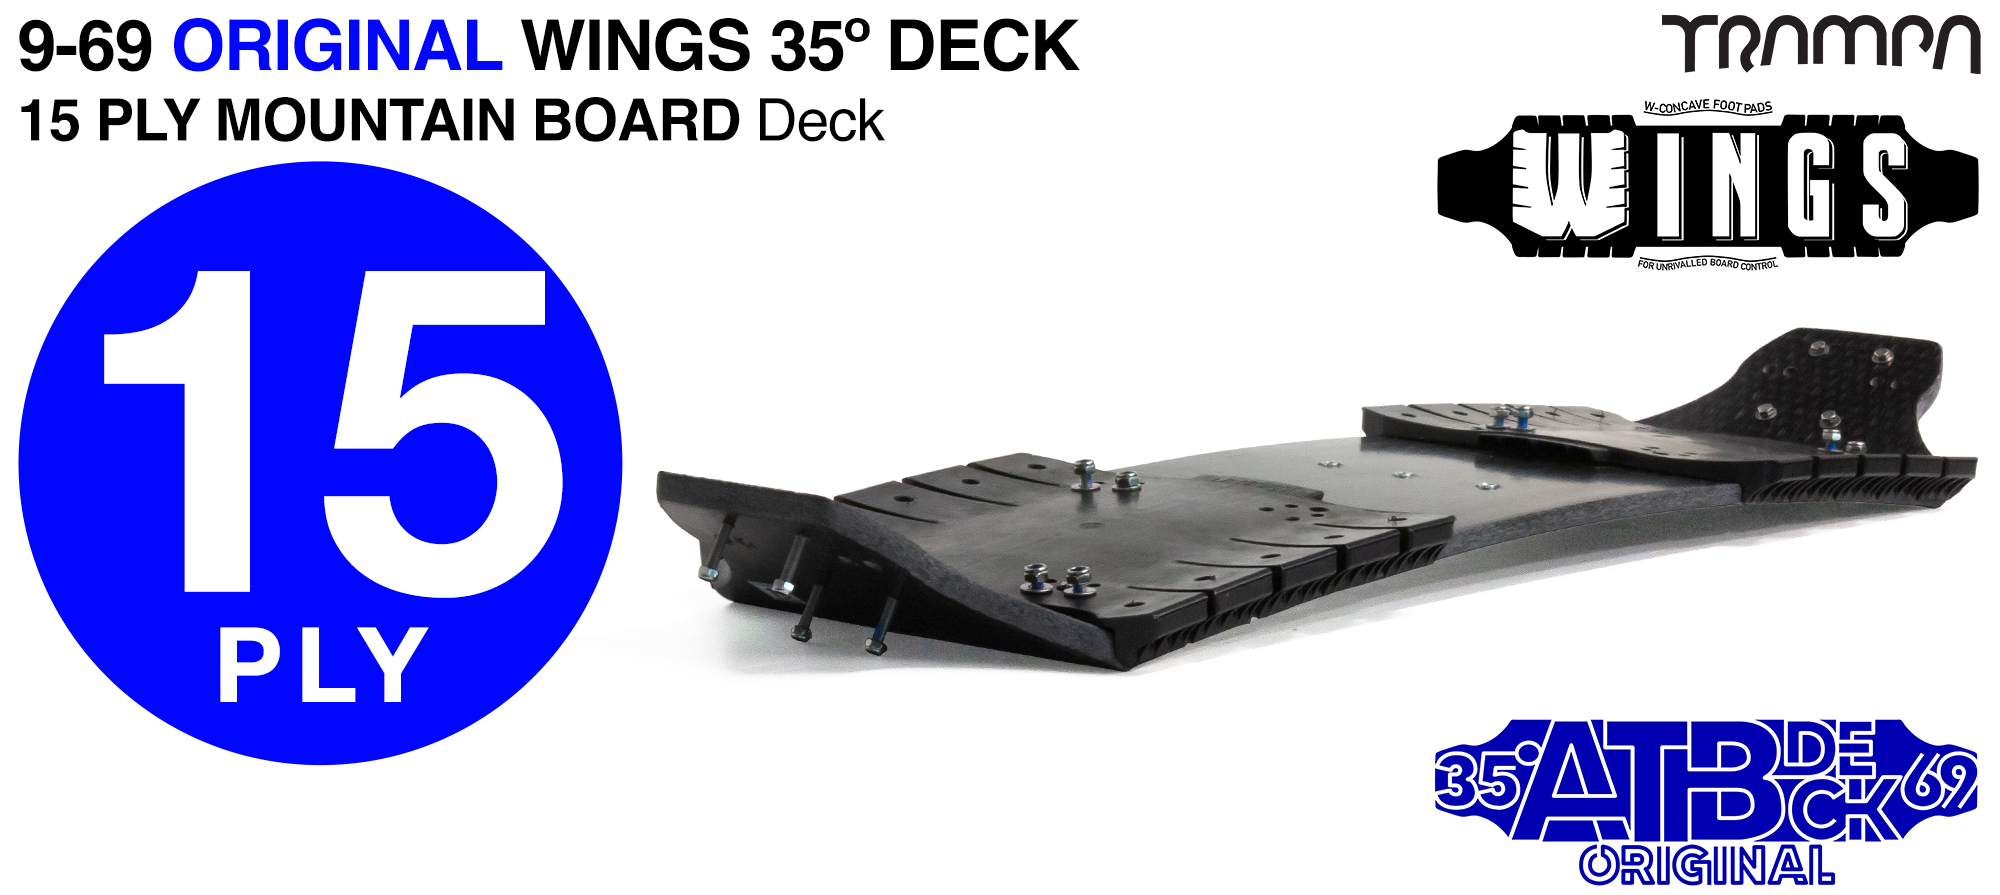 15ply 9/69 WING Deck - FIRM 